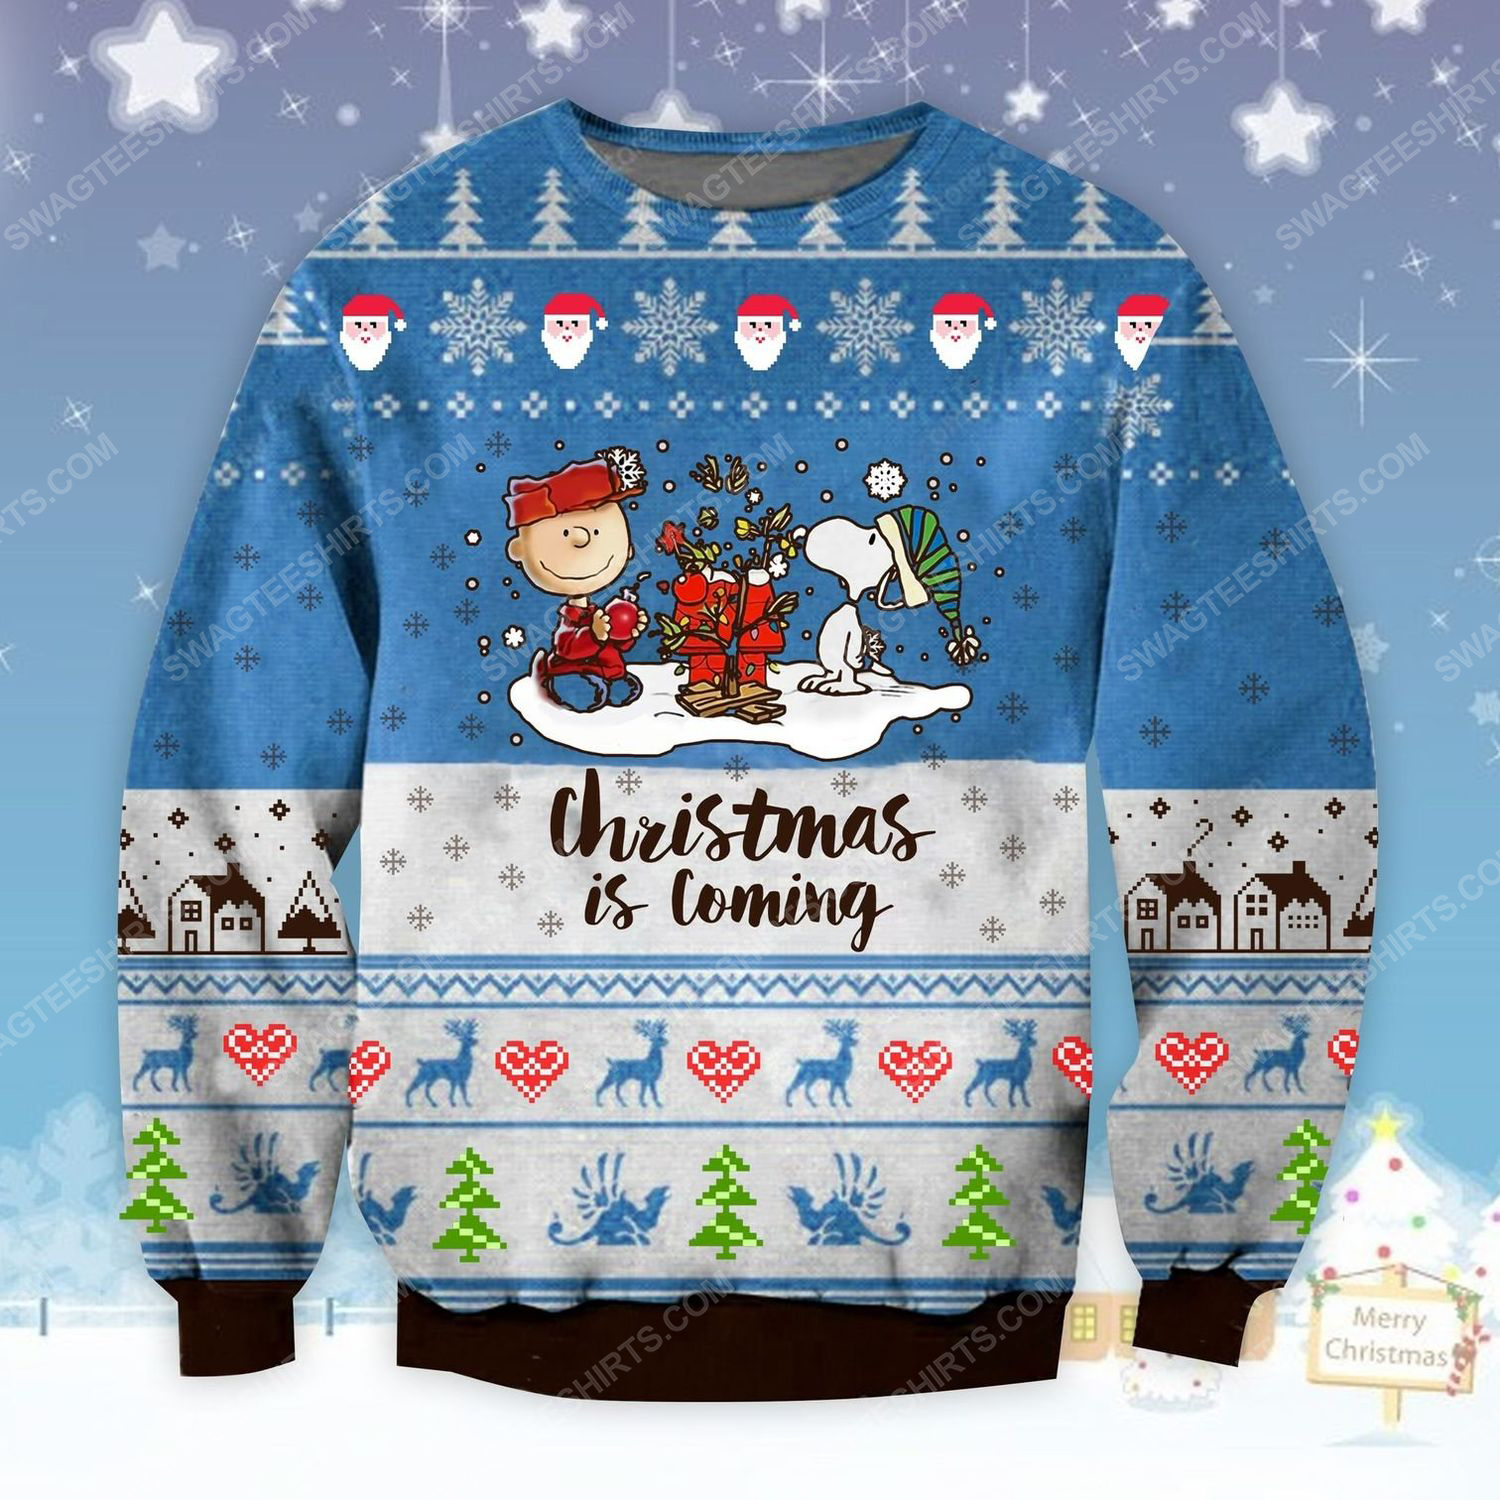 [special edition] Charlie brown and snoopy christmas is coming ugly christmas sweater – maria